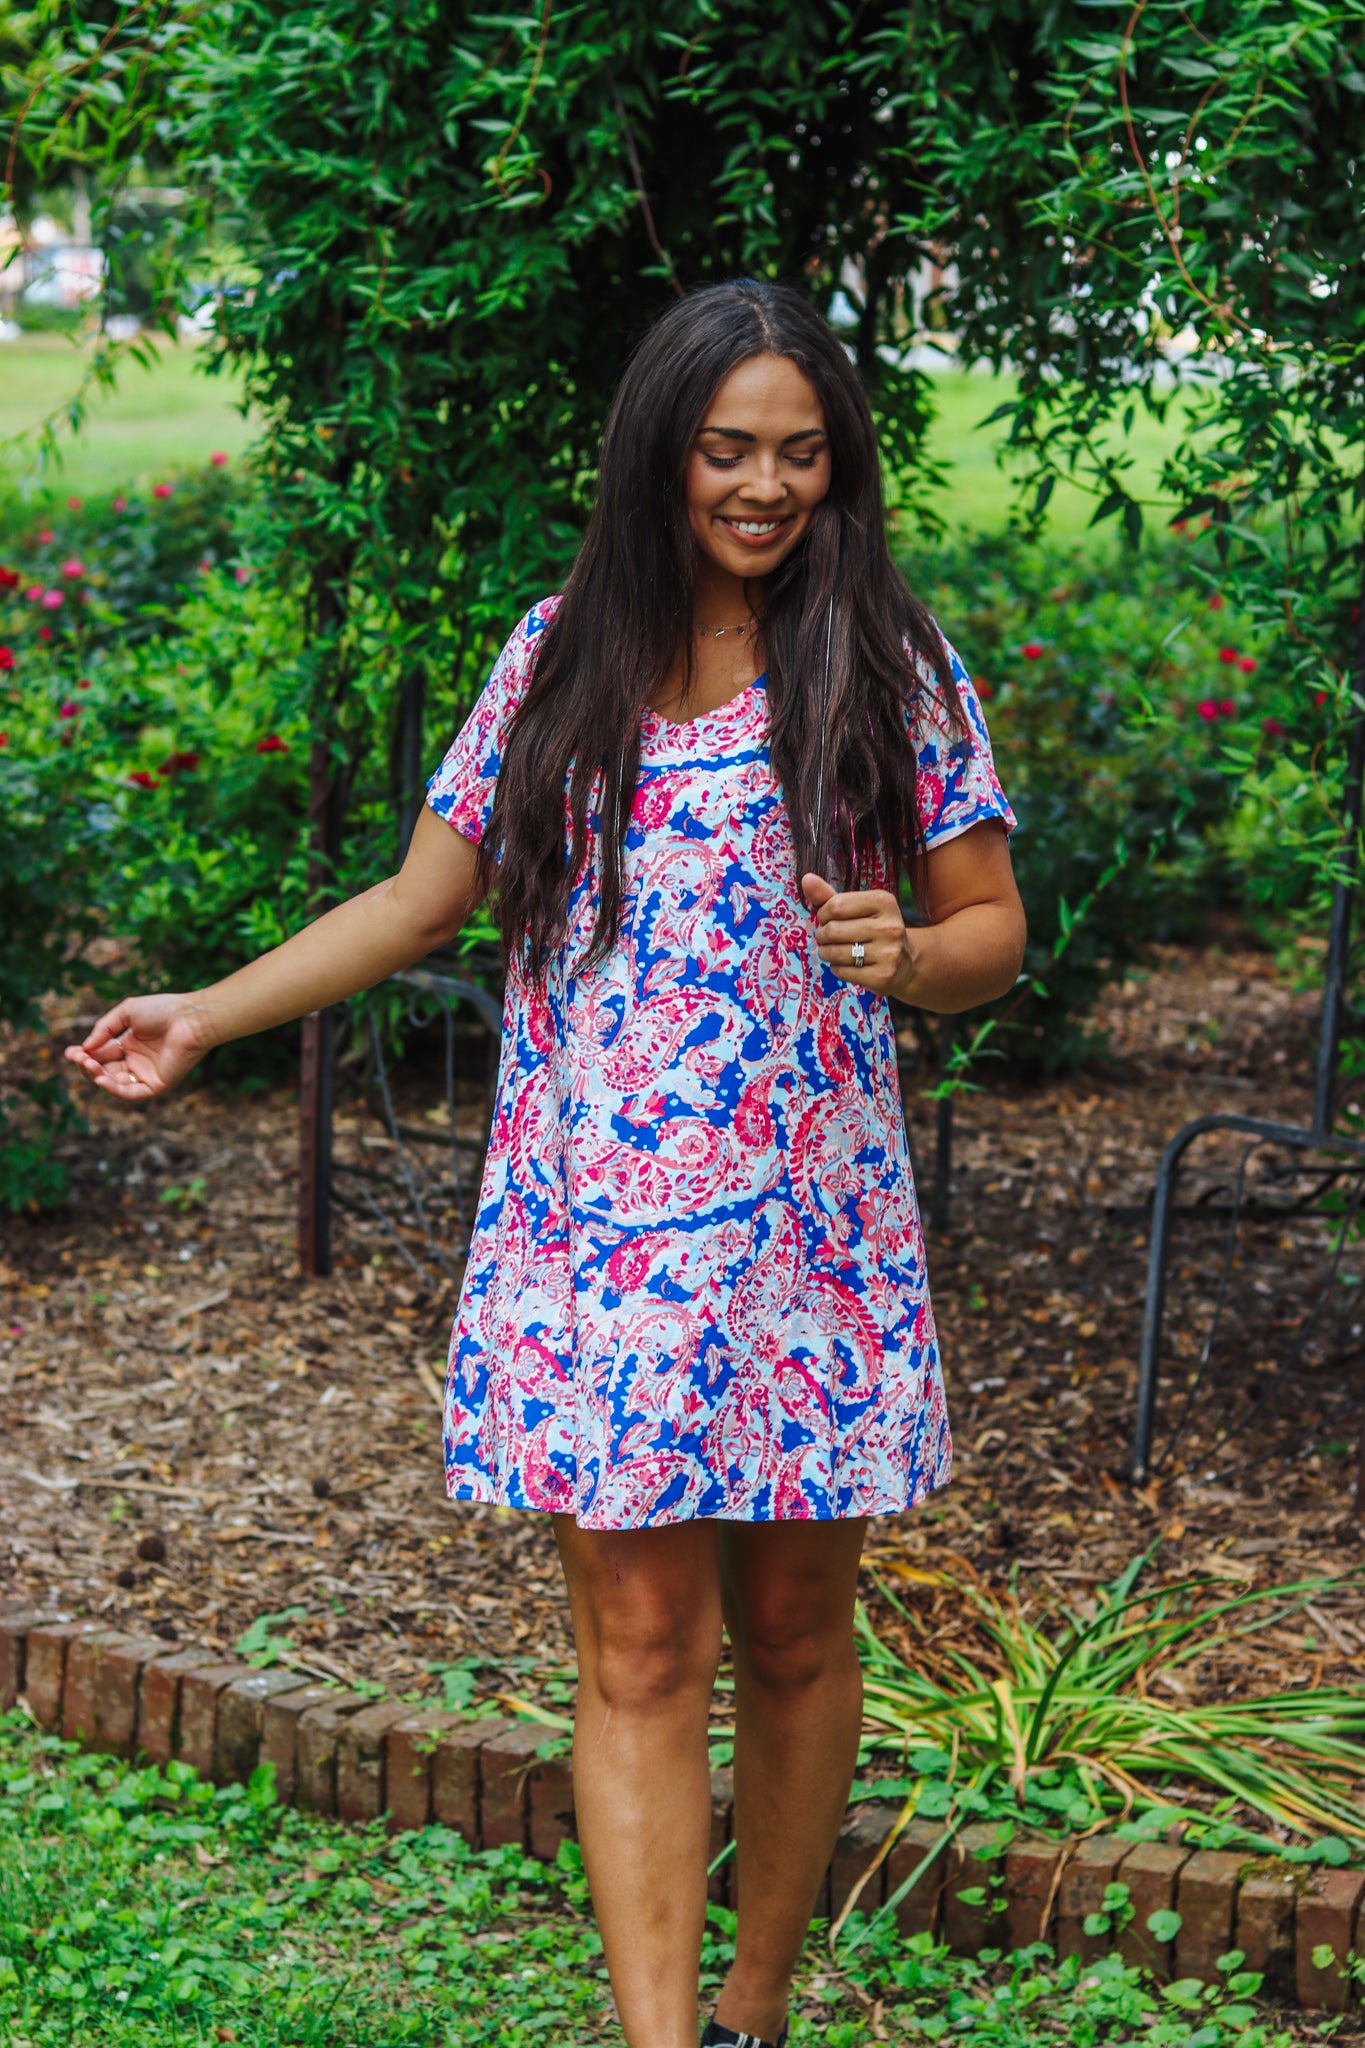 Blossoms Of Passion Royal Blue Pink Floral Dress